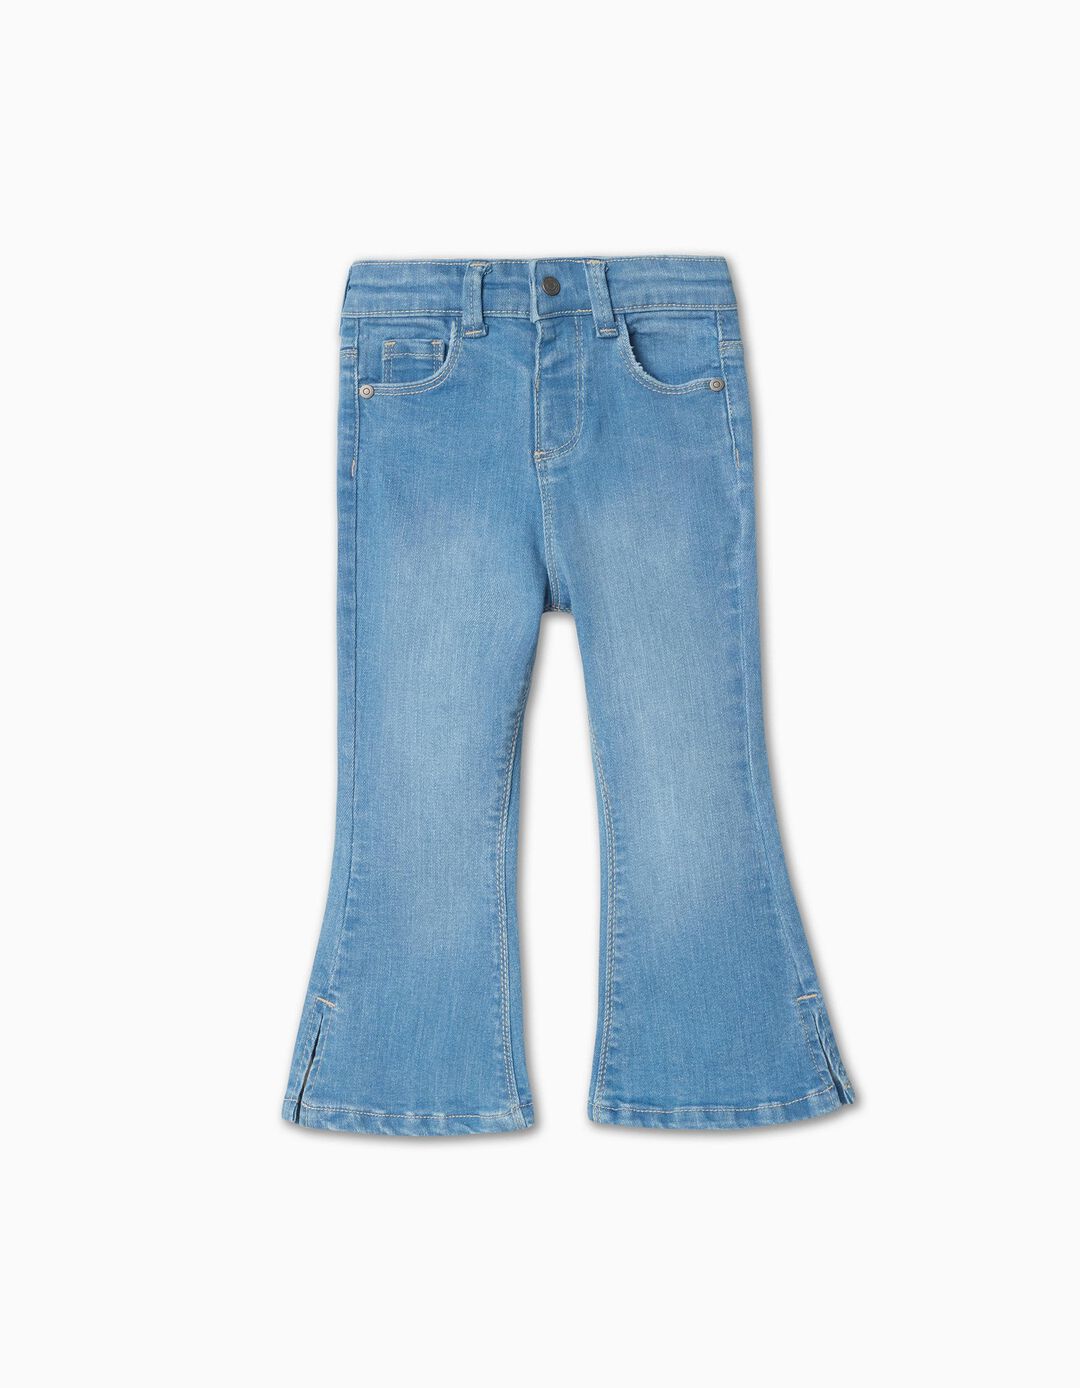 'Flare' Jeans, Baby Girl, Blue